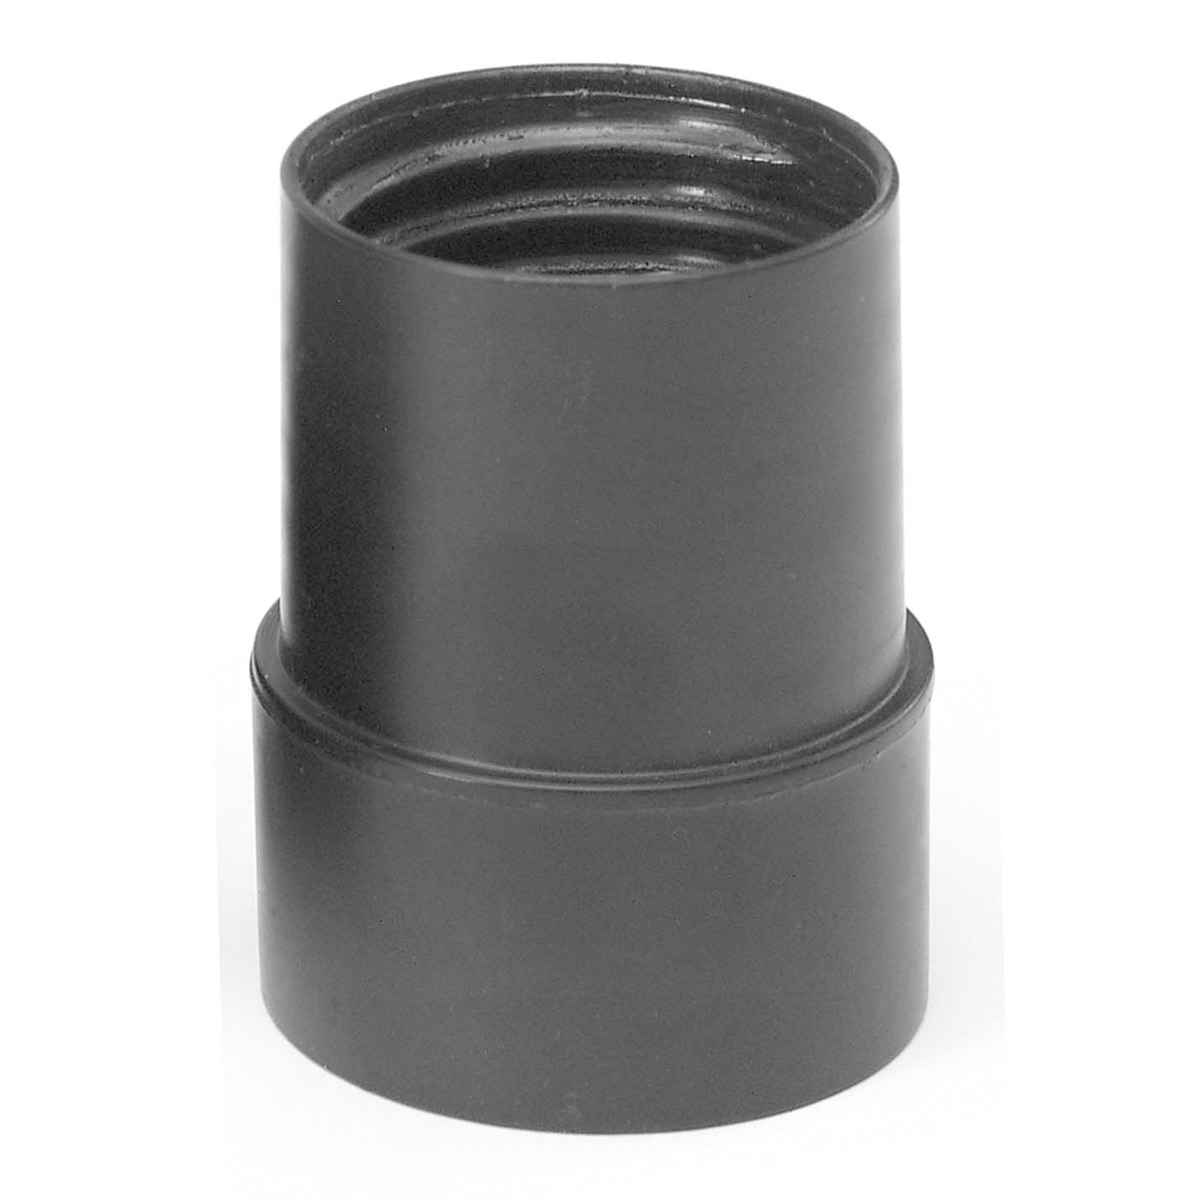 Mr. Nozzle™ Hose Adapter For 1 1/2 In. Hose for Central Vac Systems —  Detailers Choice Car Care